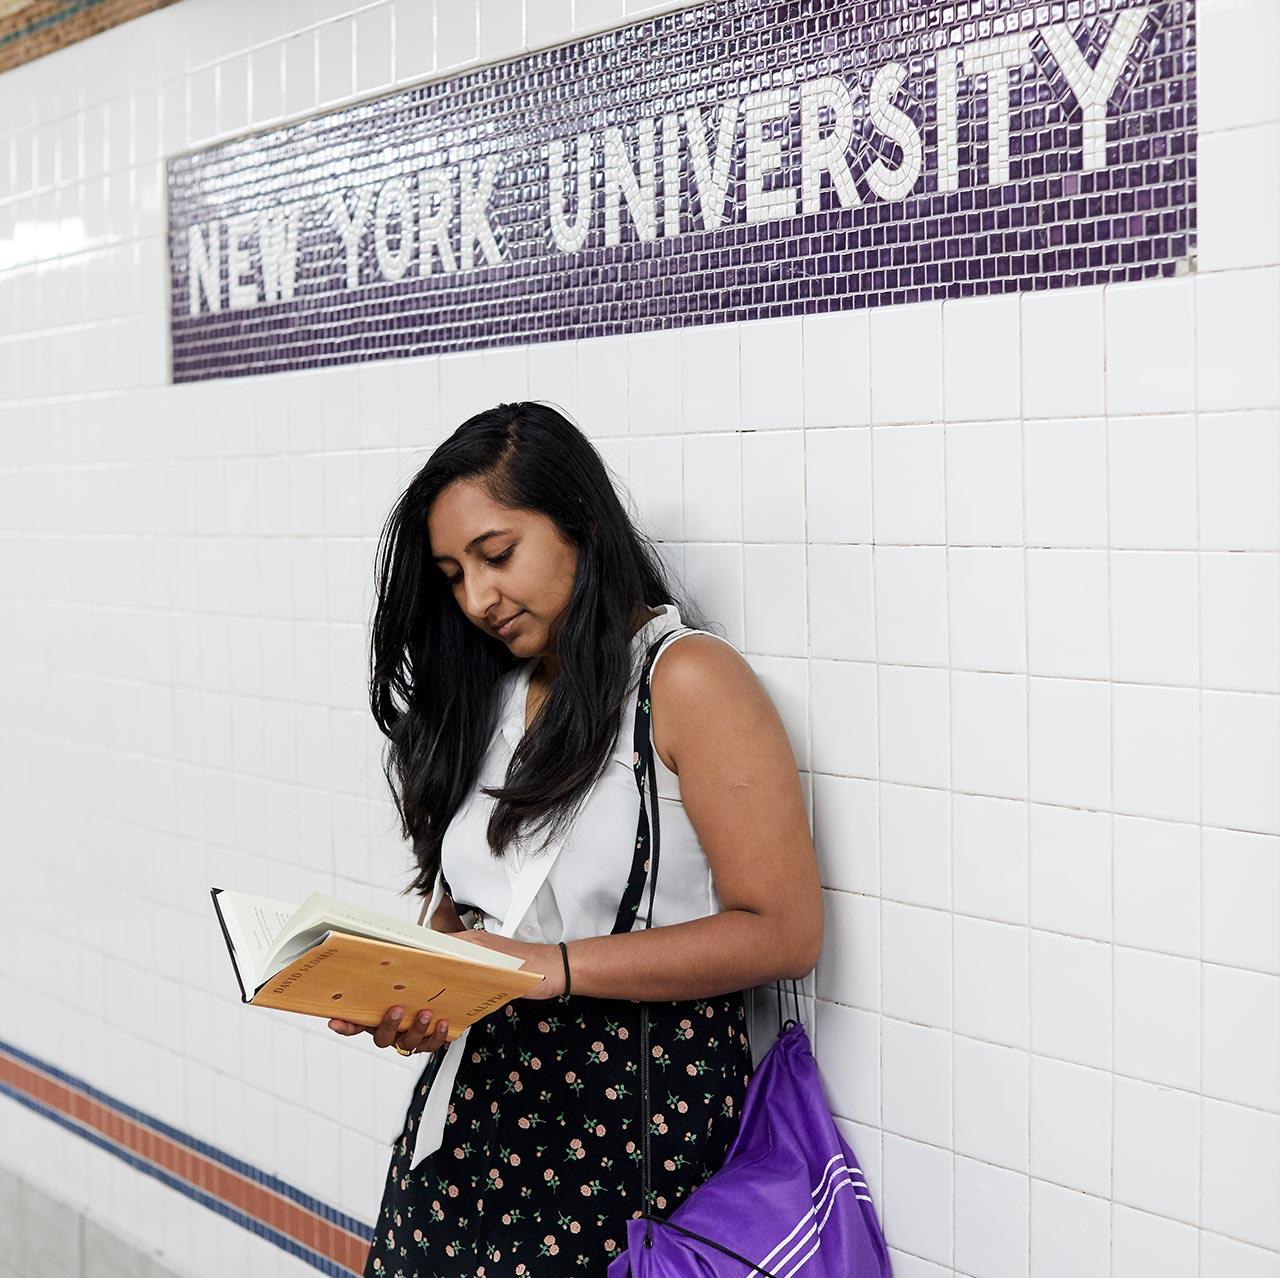 NYU student in Subway reading a book